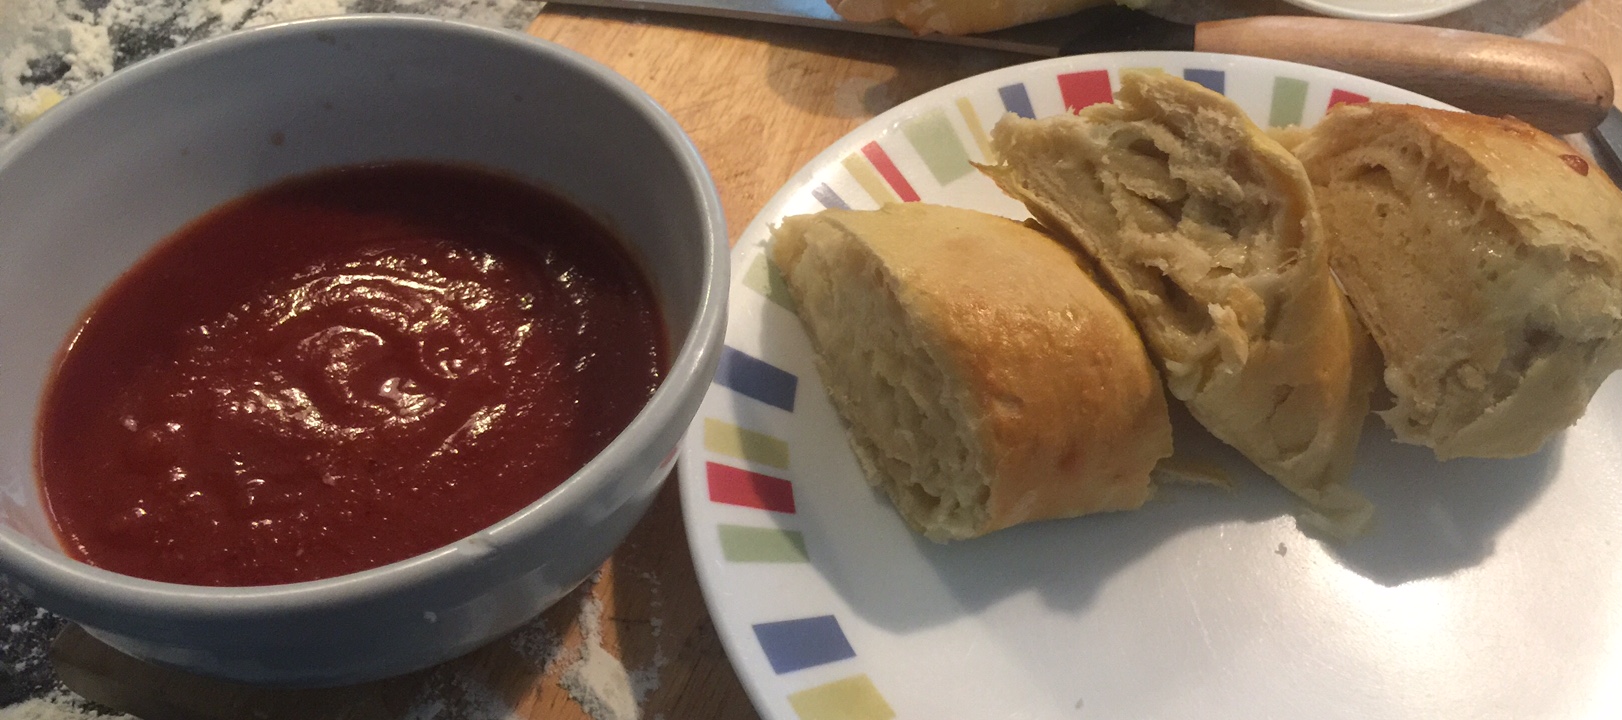 Homemade Cheese Bread and Organic Store Bought Spaghetti Sauce